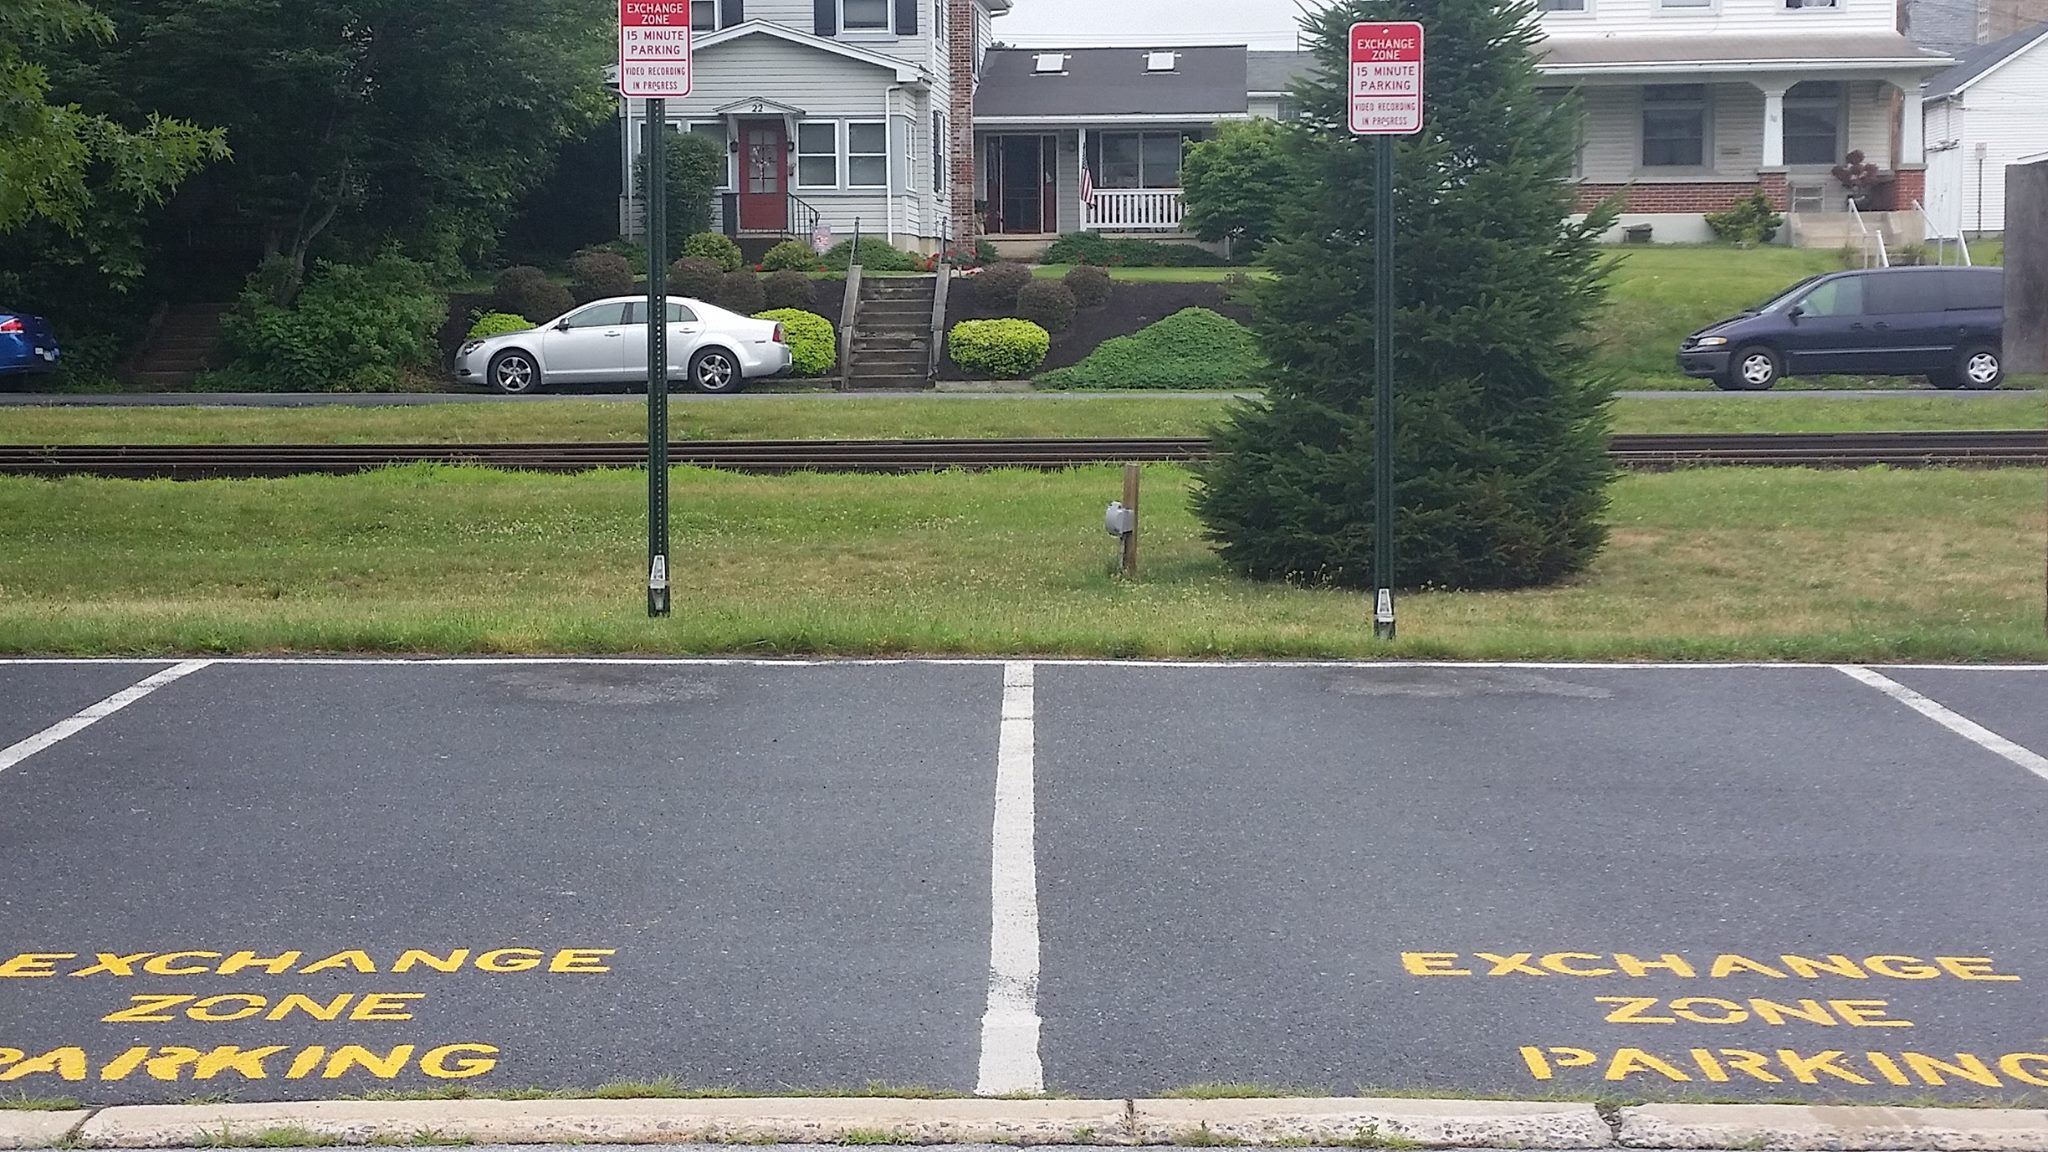 Two exchange zone parking spaces are located in the parking lot at 45 Railroad Street, Kutztown, PA 19530.